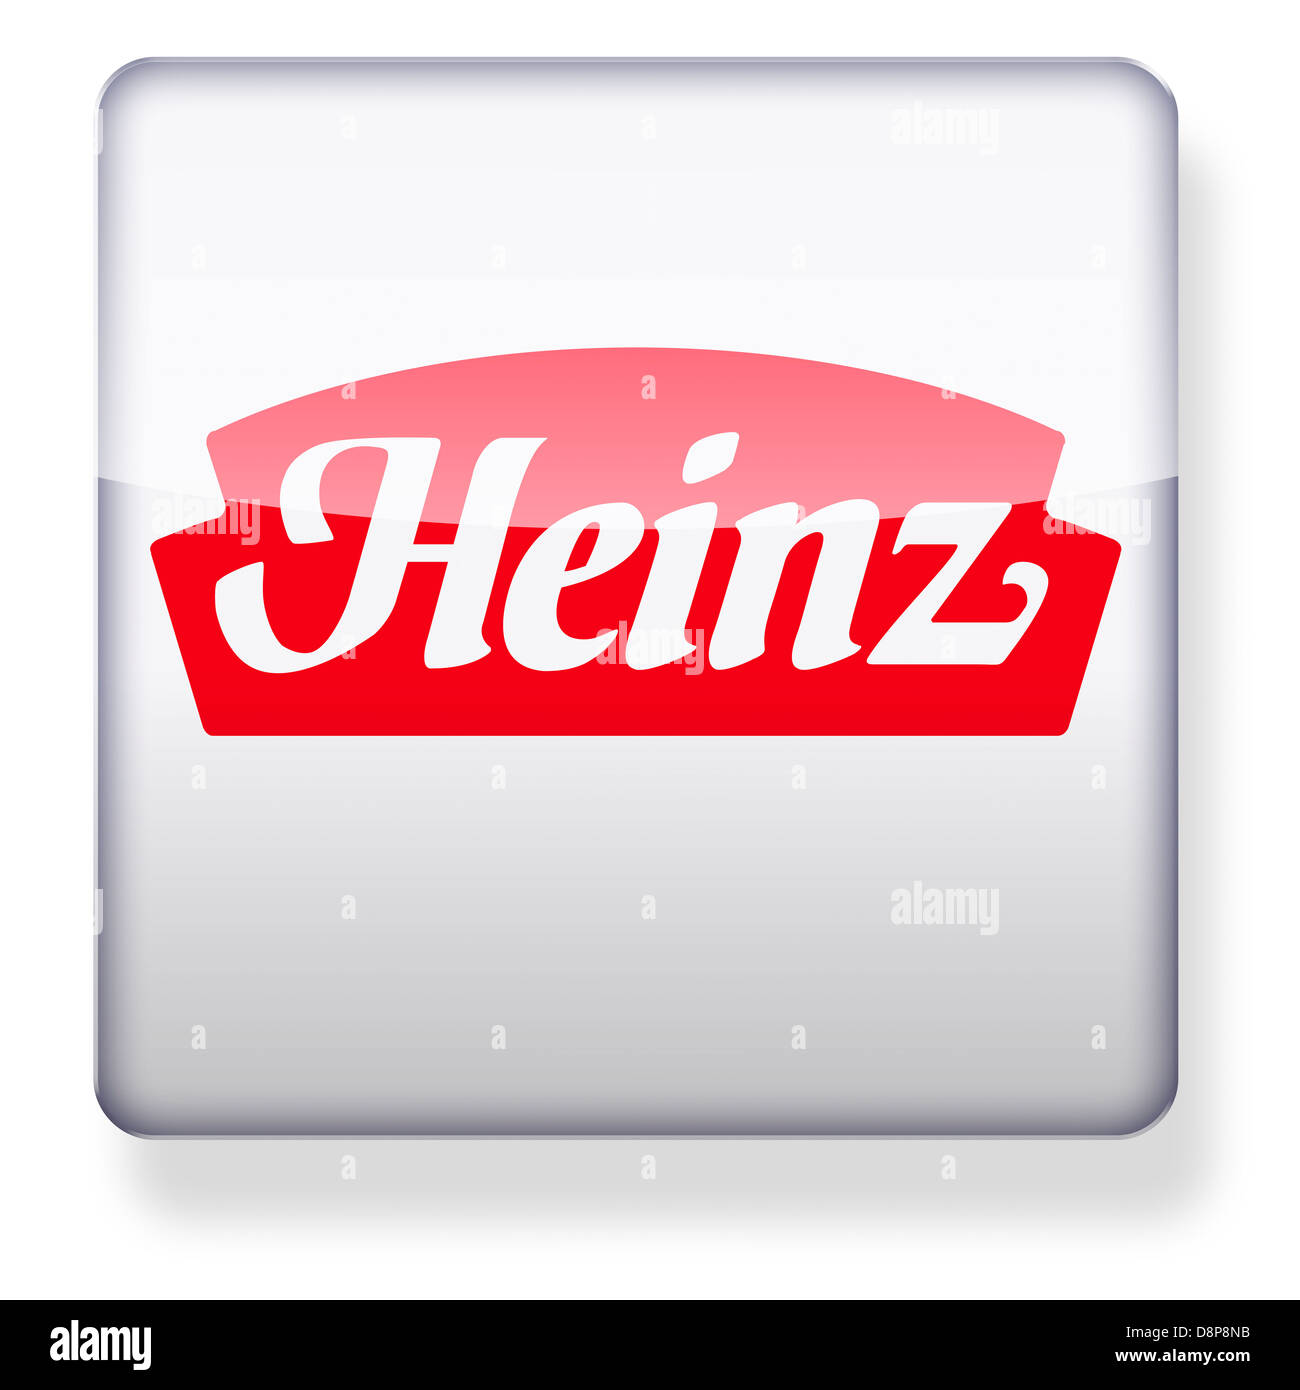 Heinz logo as an app icon. Clipping path included. Stock Photo